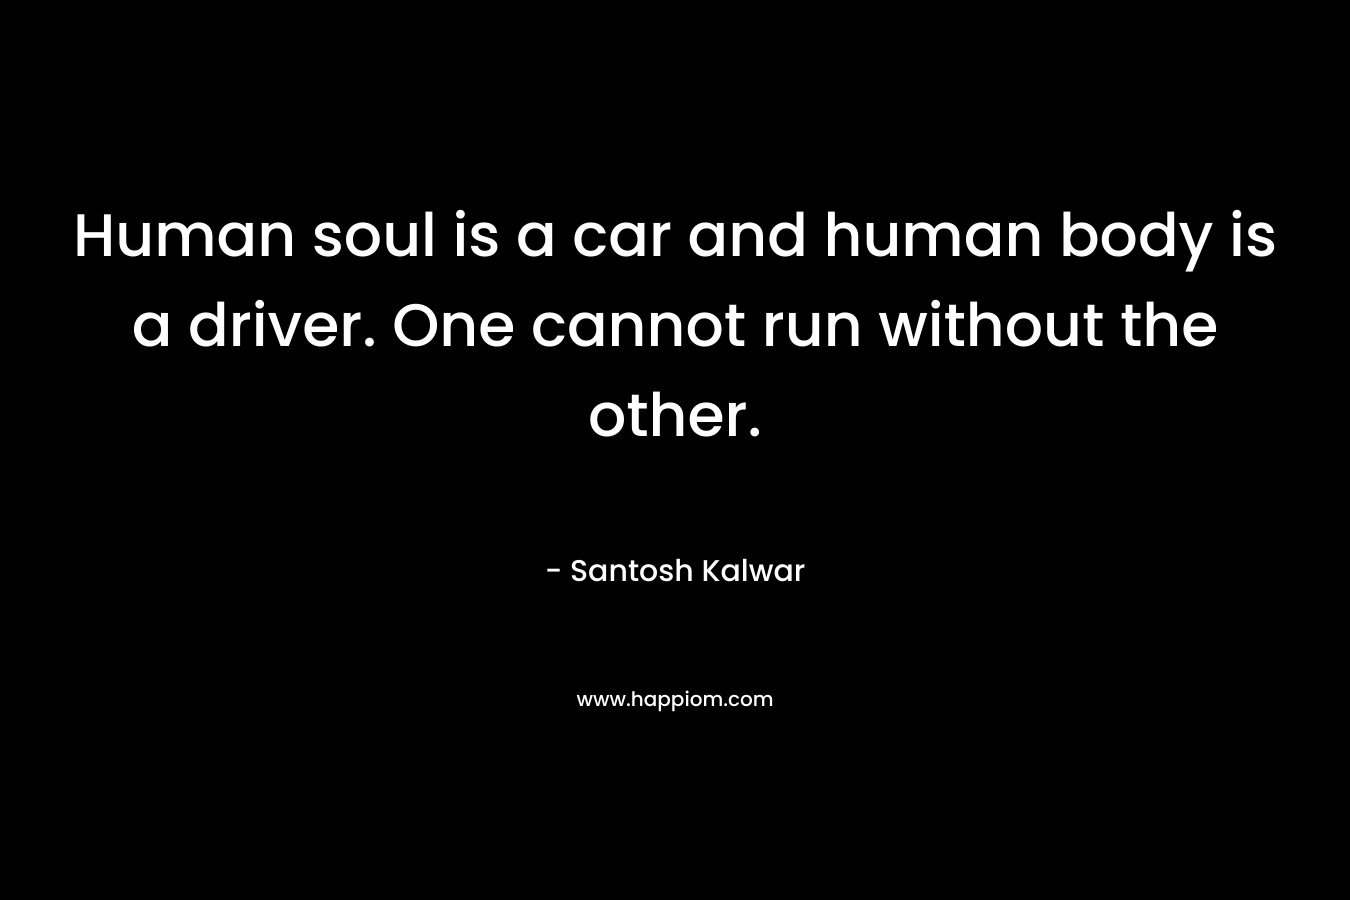 Human soul is a car and human body is a driver. One cannot run without the other.